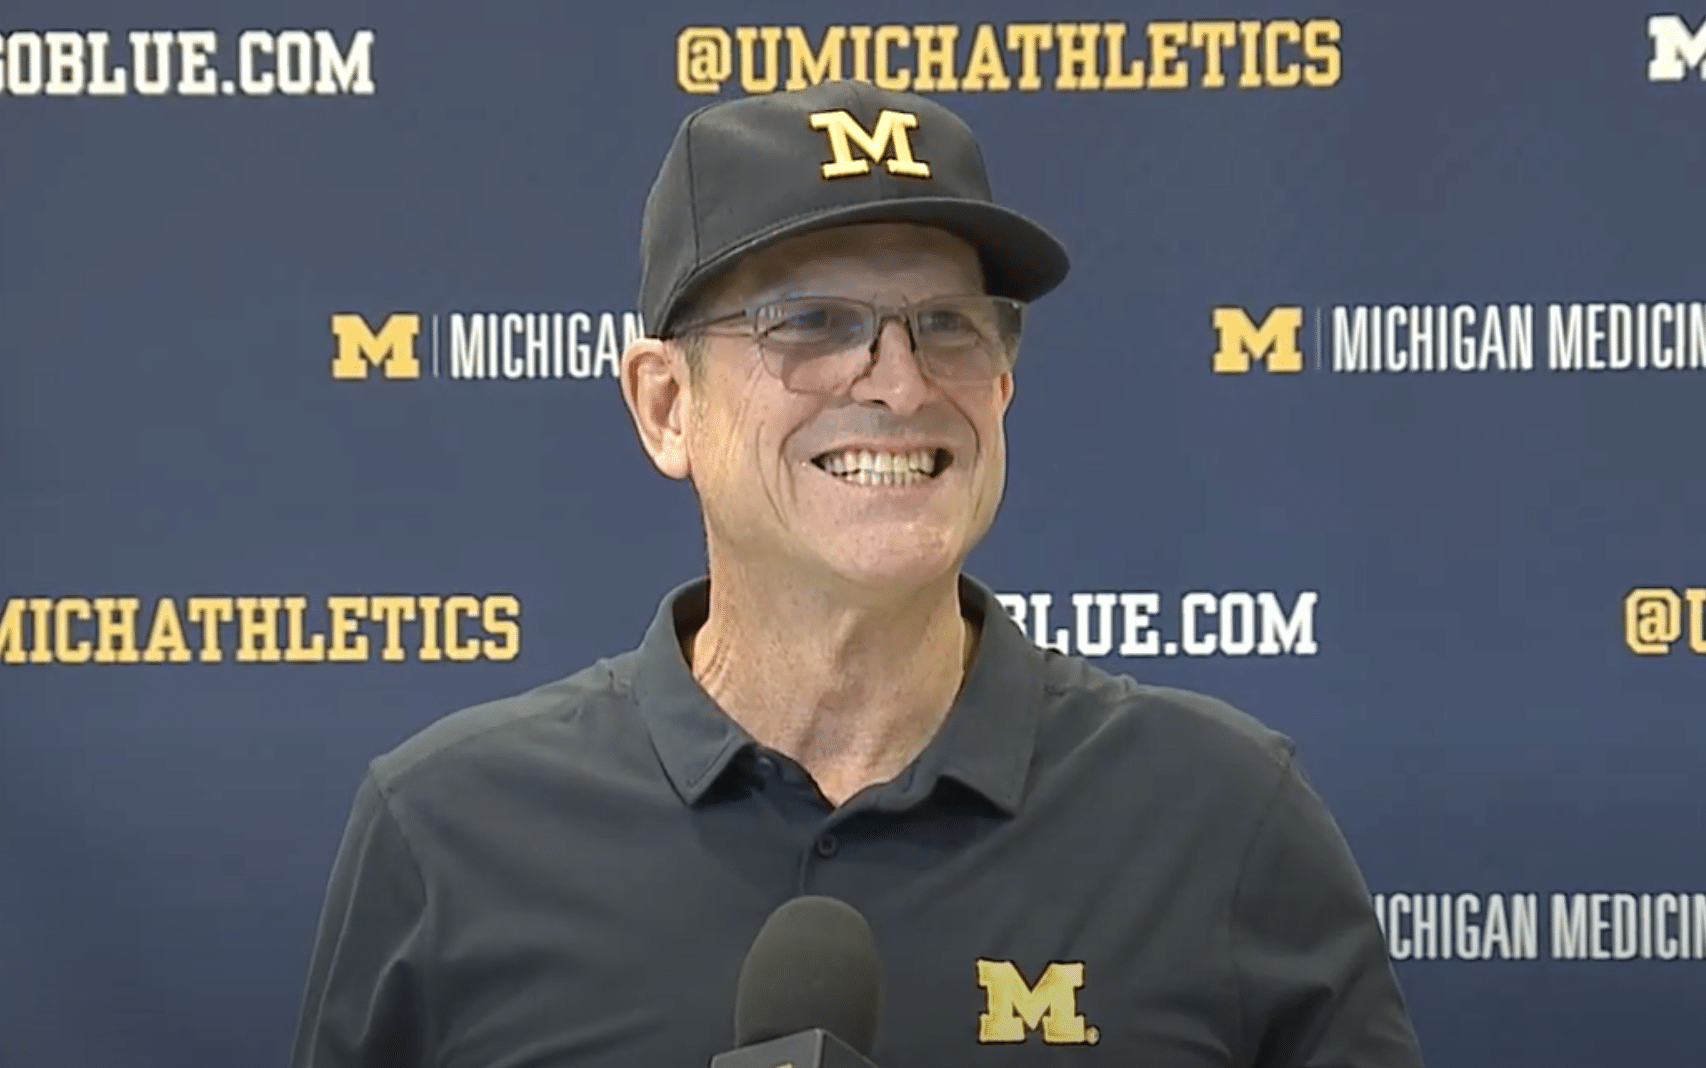 Jim Harbaugh explains why Michigan Football Jim Harbaugh compares Michigan locker room Jim Harbaugh praises Sherrone Moore Will Jim Harbaugh receive his bonuses for 2023 Los Angeles Chargers interested in hiring Jim Harbaugh Jim Harbaugh Talks About J.J. McCarthy's Growth at Michigan Jim Harbaugh Has Perfect Answer to Question About His Future Will He Stay or Go? New Developments in Jim Harbaugh's Career with Michigan Revealed Jim Harbaugh interviews with Atlanta Falcons Jim Harbaugh contract details with Los Angeles Chargers Jim Harbaugh shows support for Detroit Lions